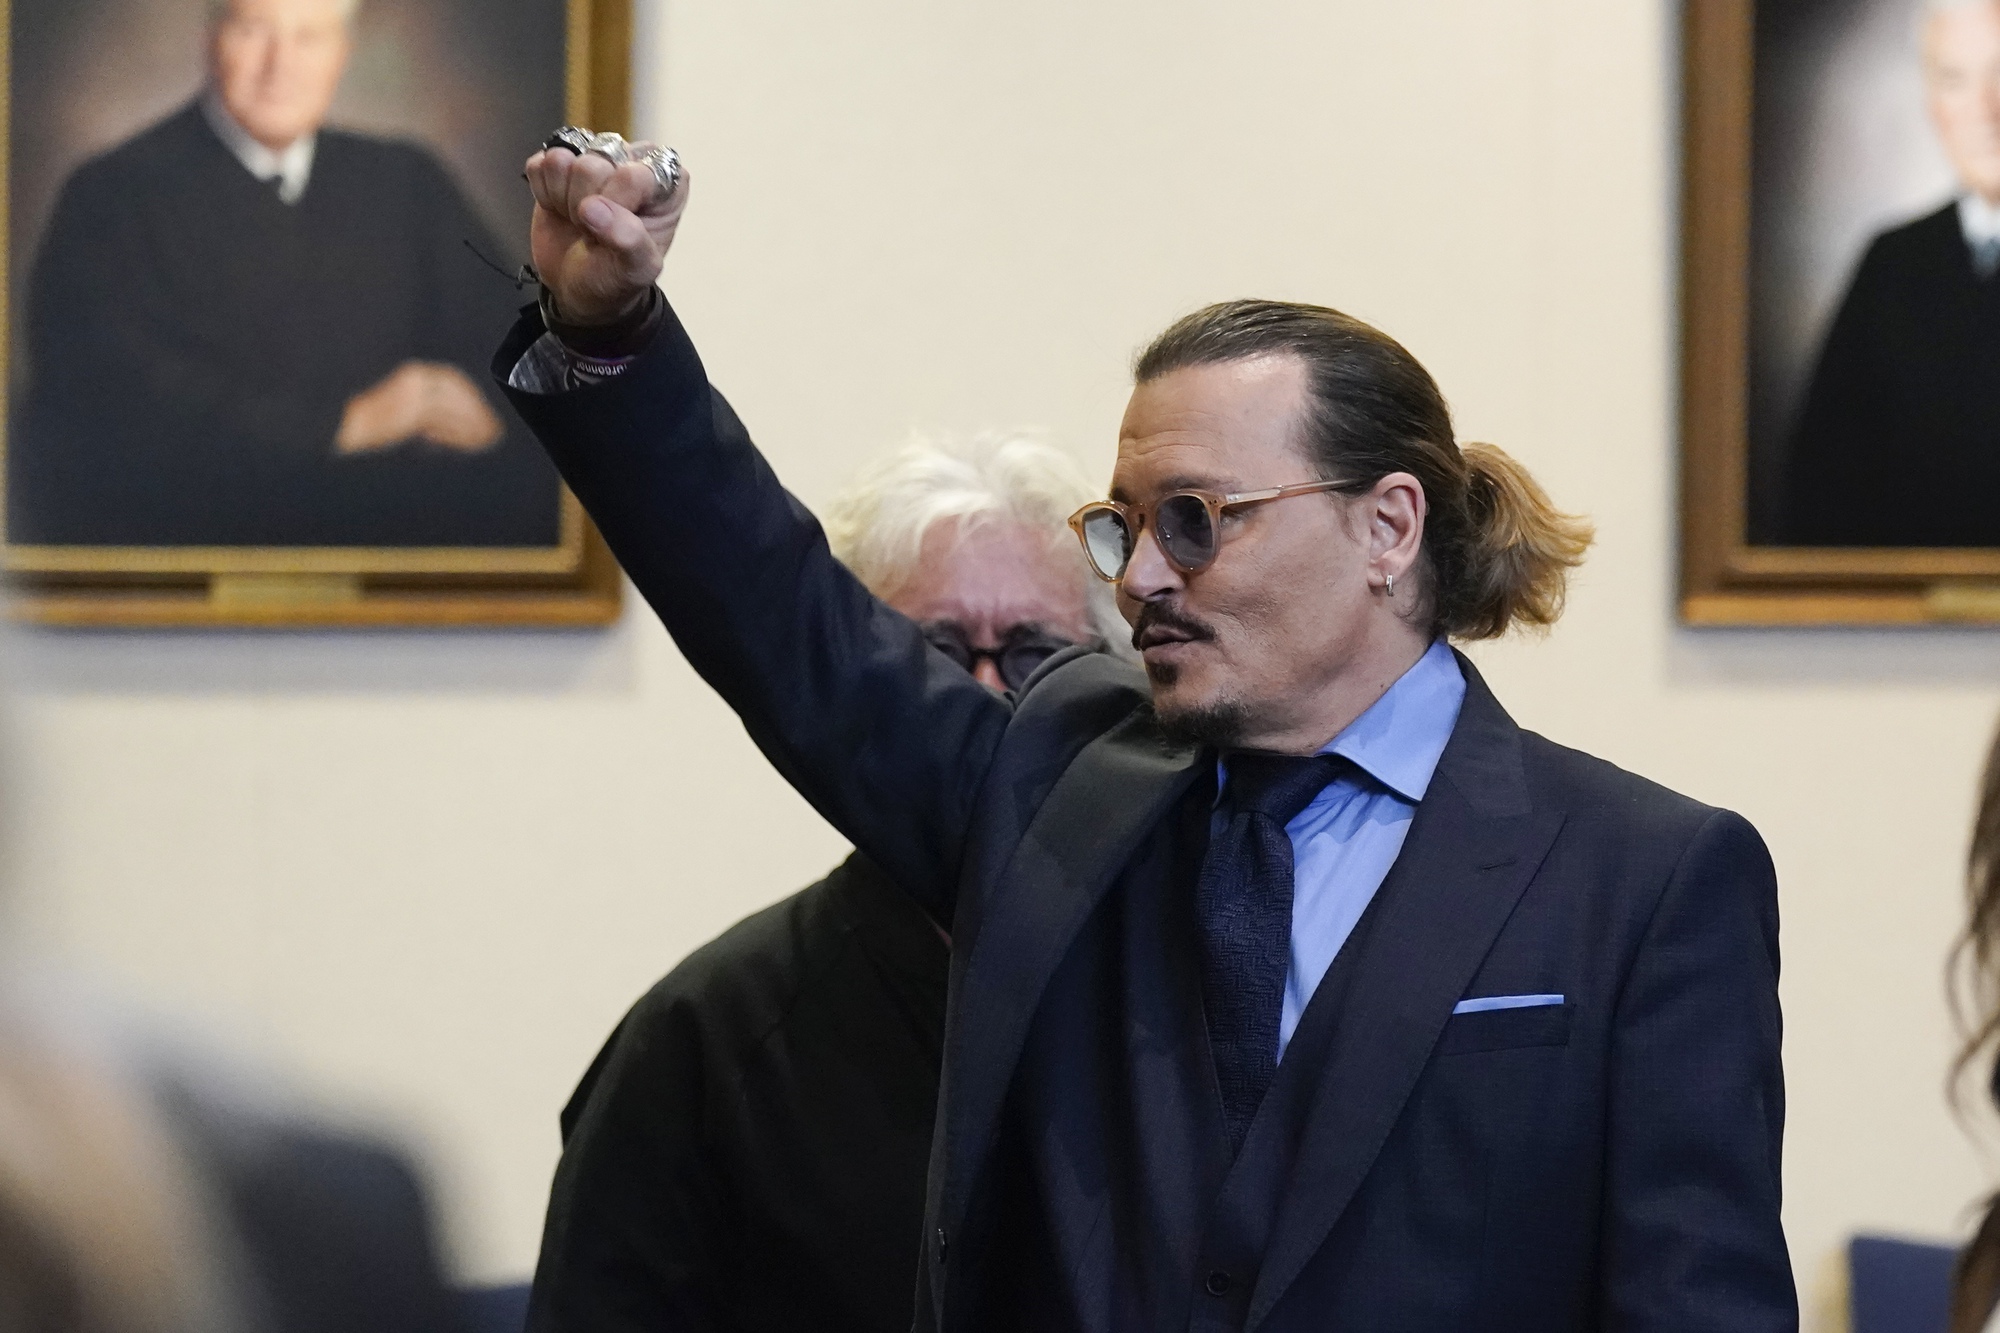 Wristband in Johnny Depp and Amber Herd trial sold for 